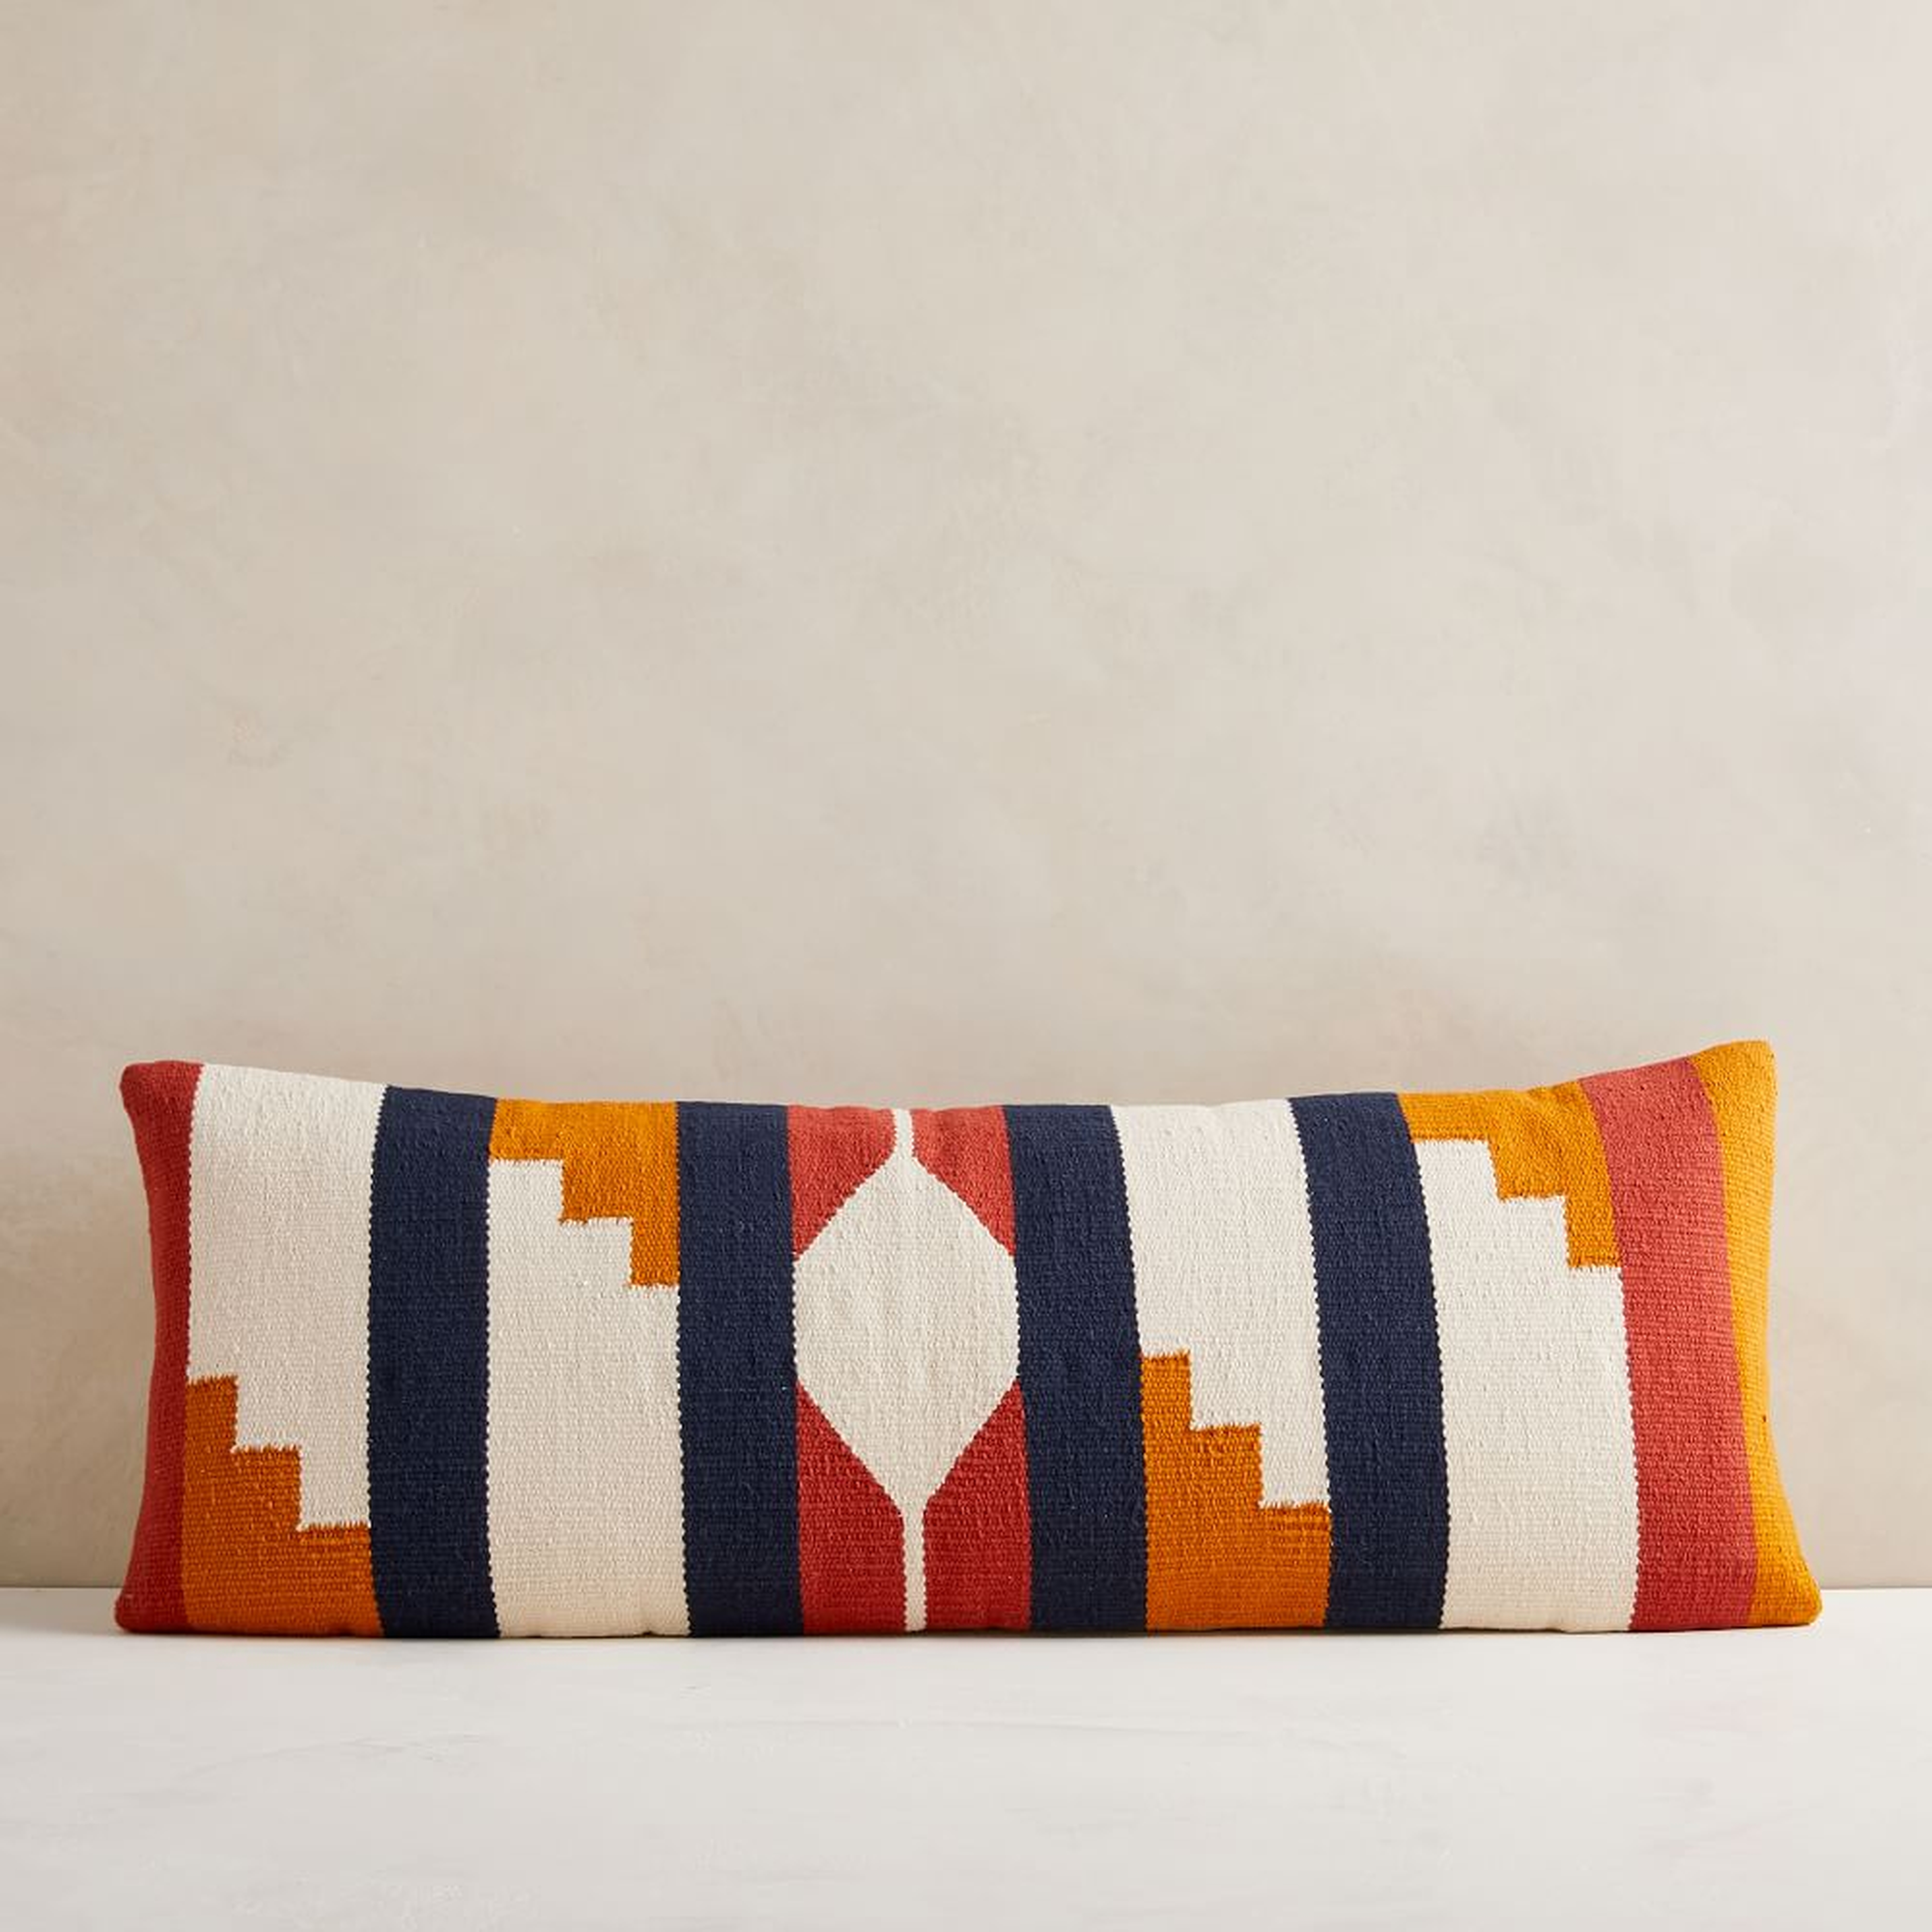 Woven Alta Pillow Cover, 14"x36", Ginger - West Elm